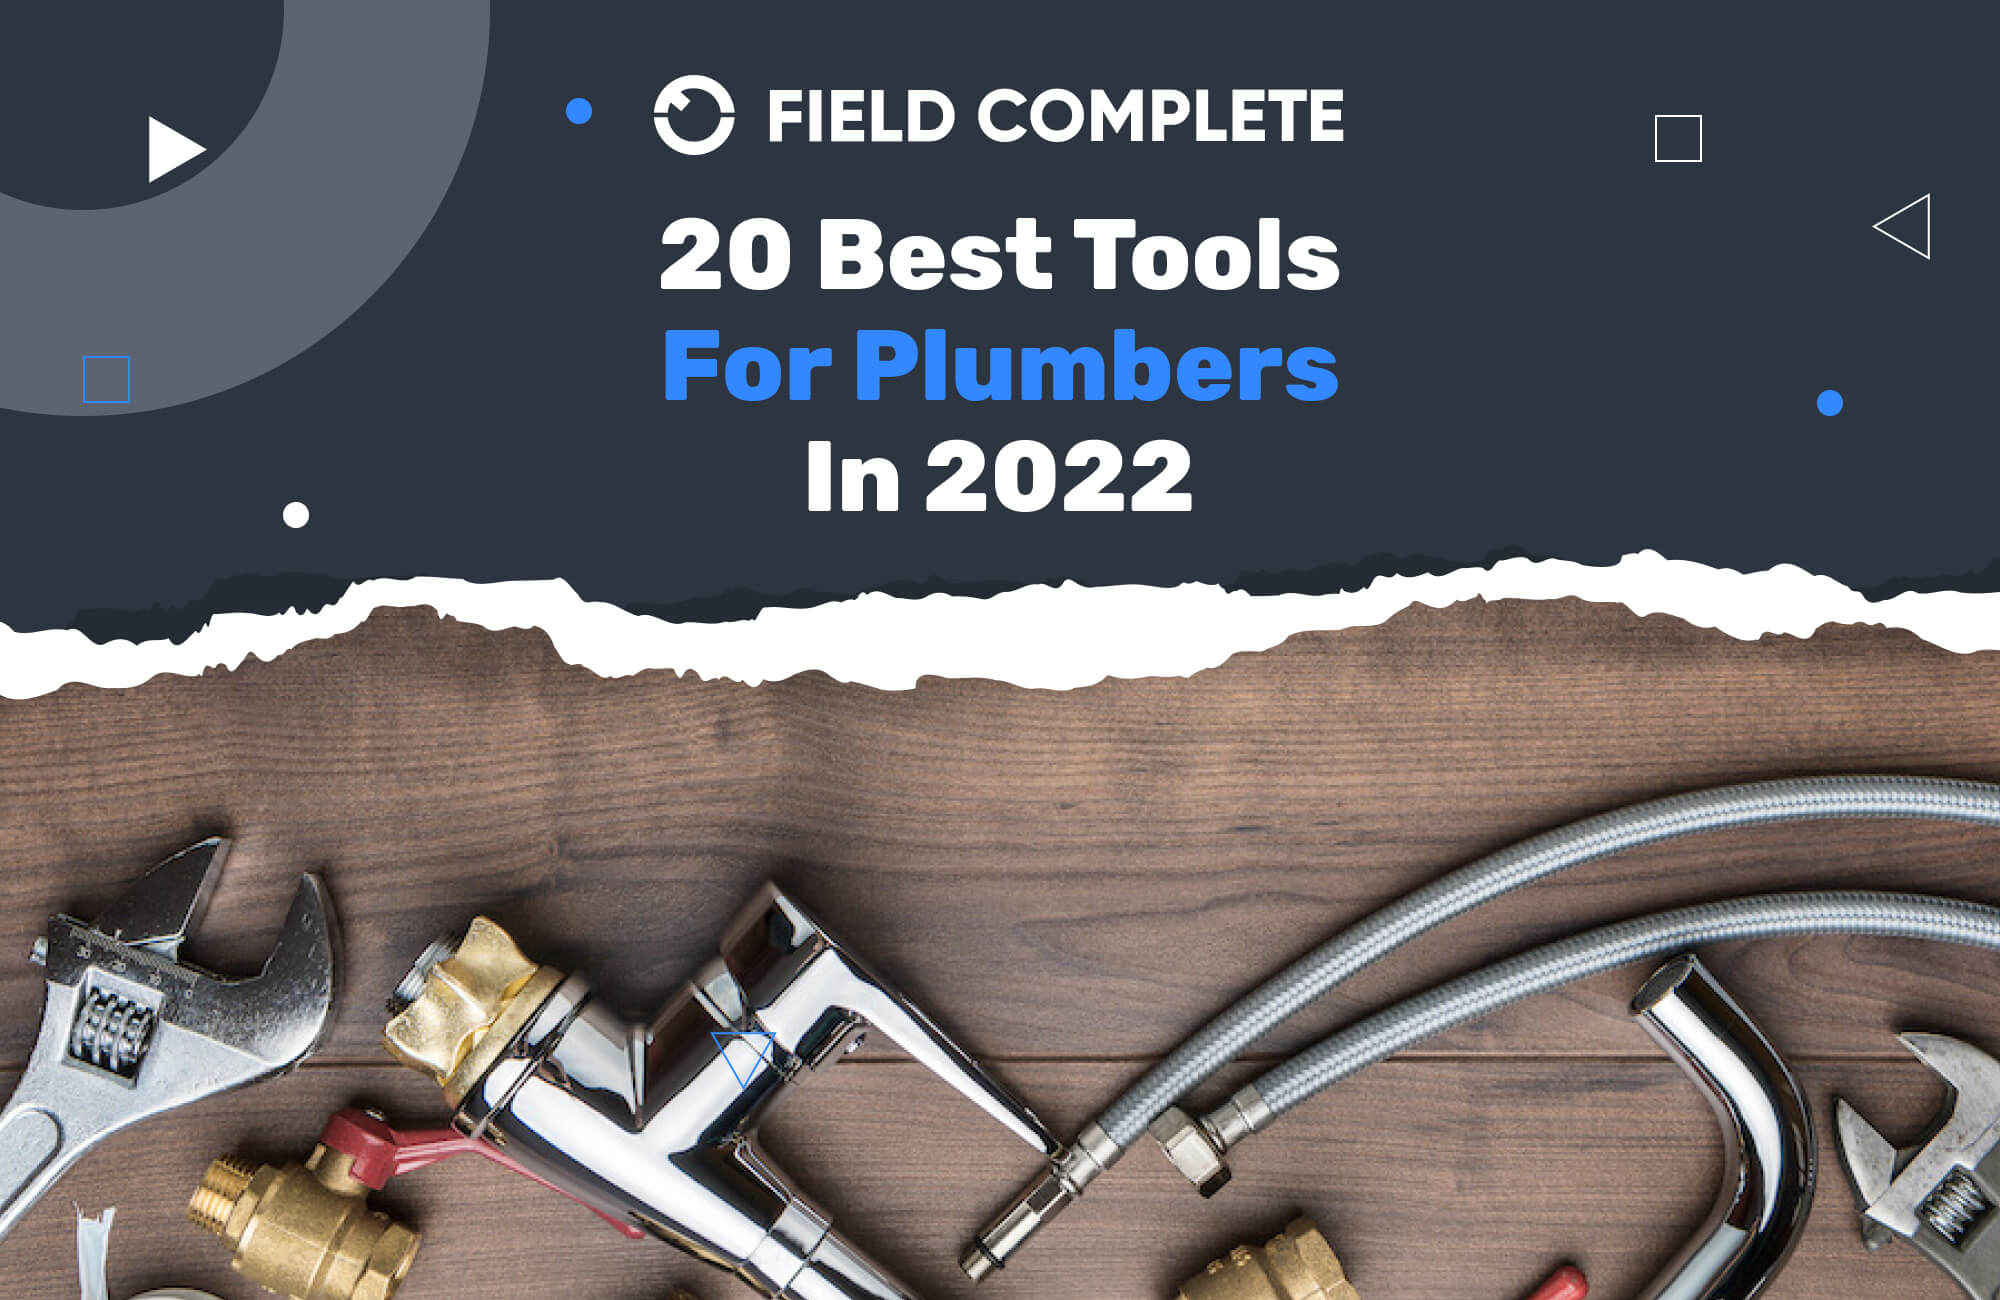 http://fieldcomplete.com/wp-content/uploads/2022/05/20-Best-Tools-For-Plumbers-In-2022-1.jpg